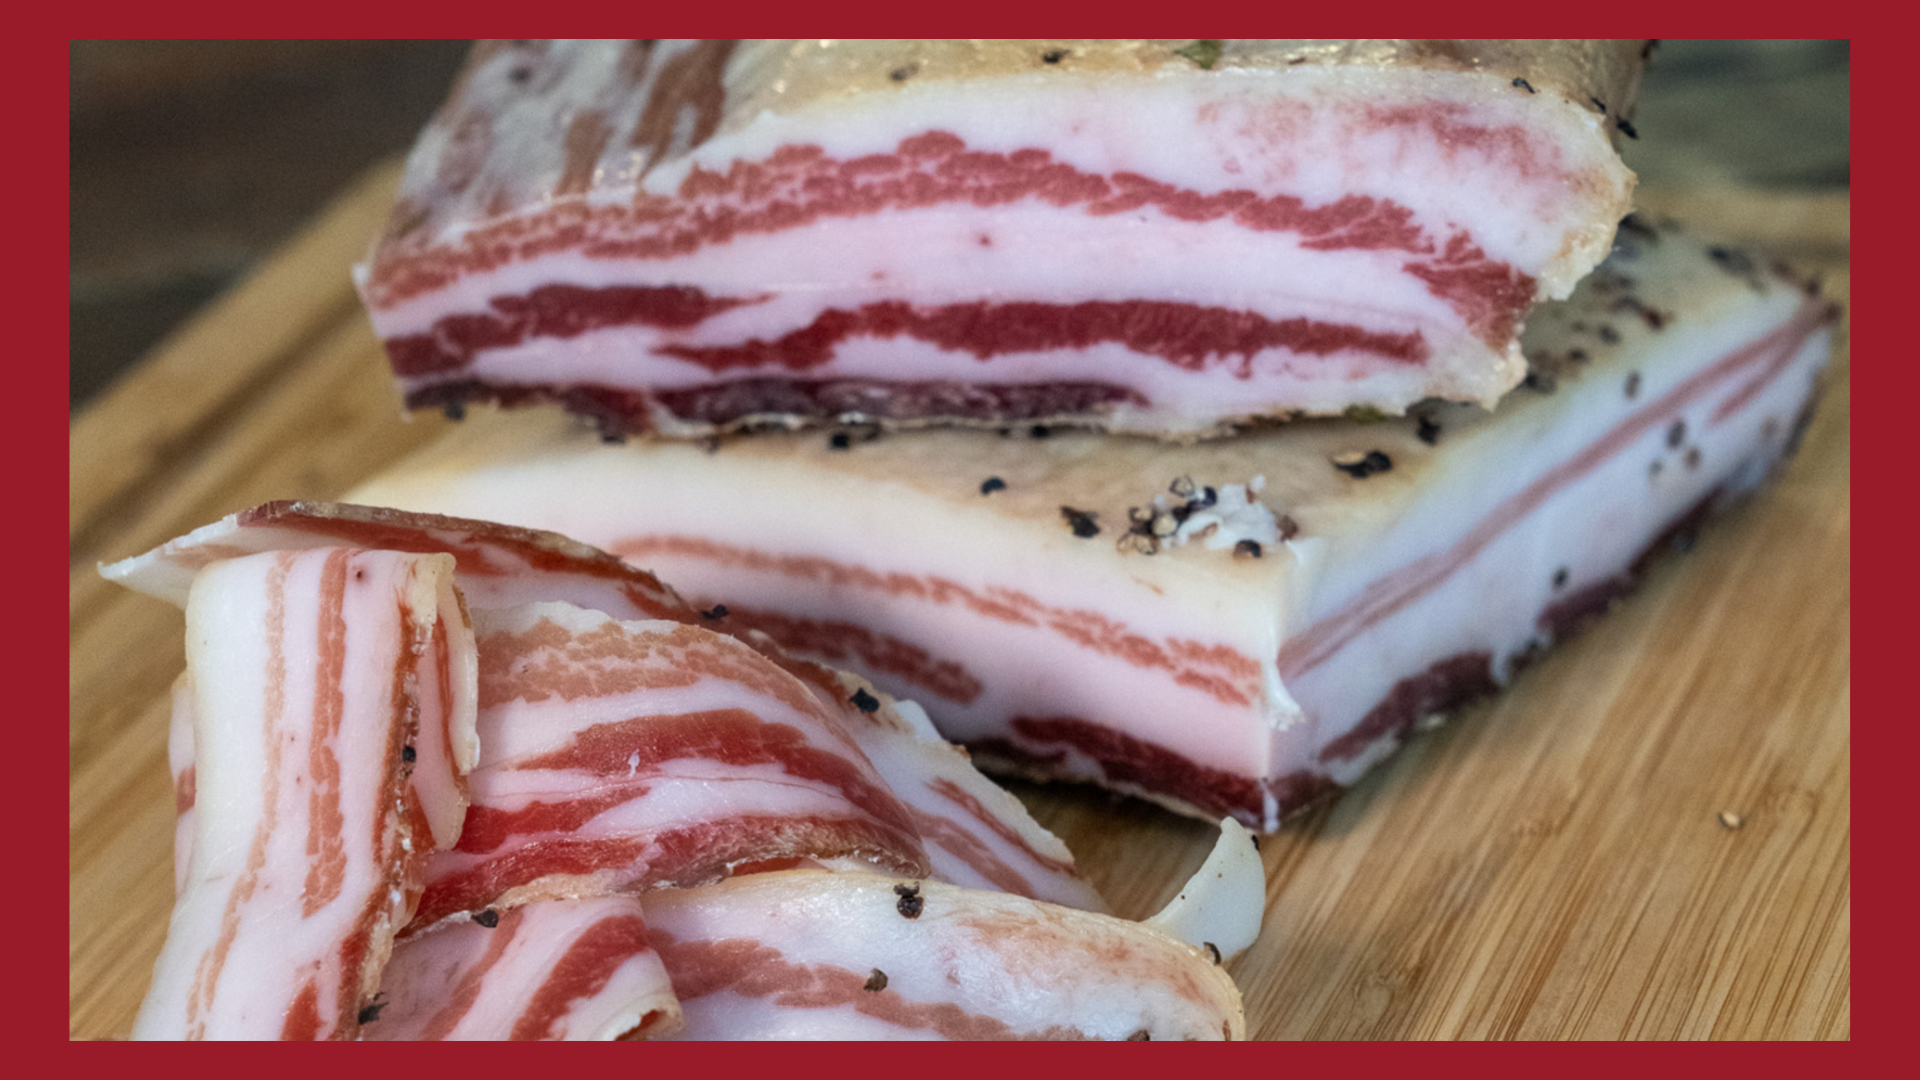 A close up picture of pancetta in whole chubs and in slices on a cutting board.